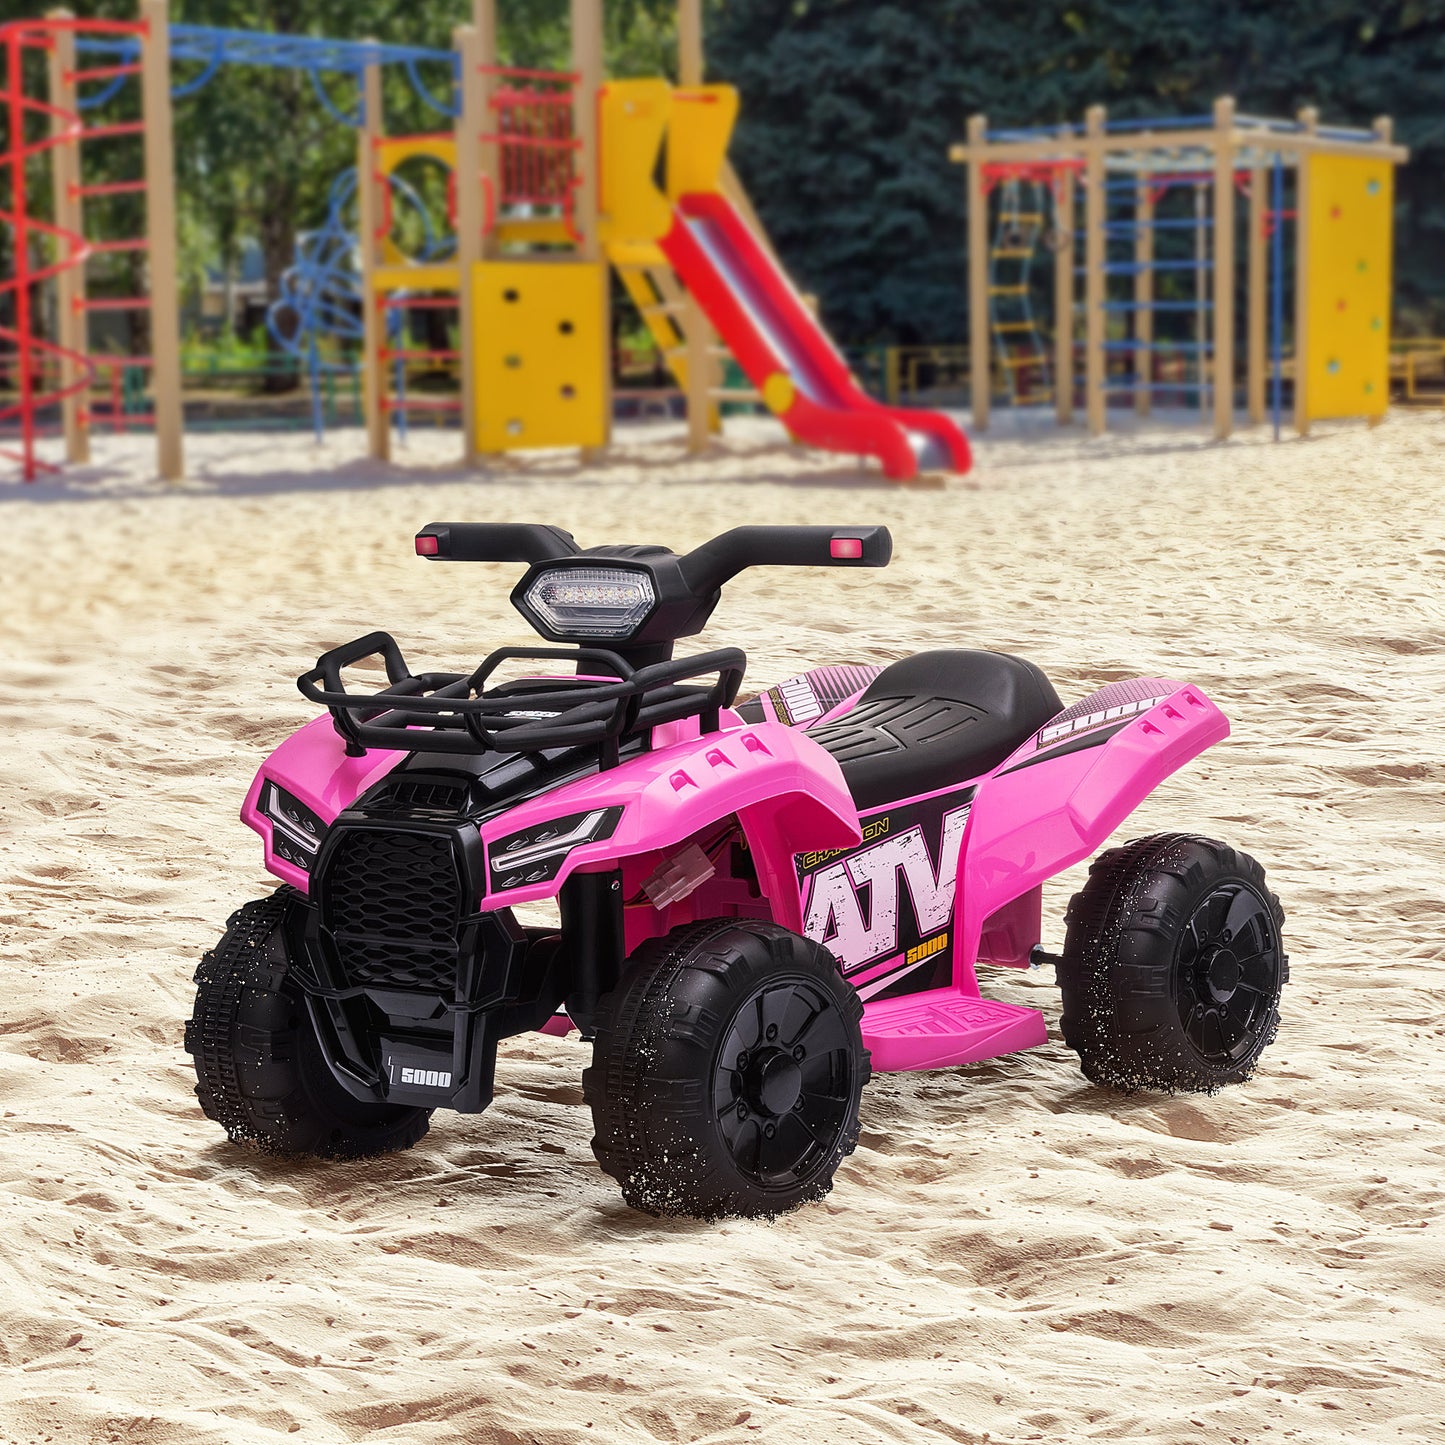 Exclusive Kids 4 Wheeler Electric Ride On ATV Toy Car